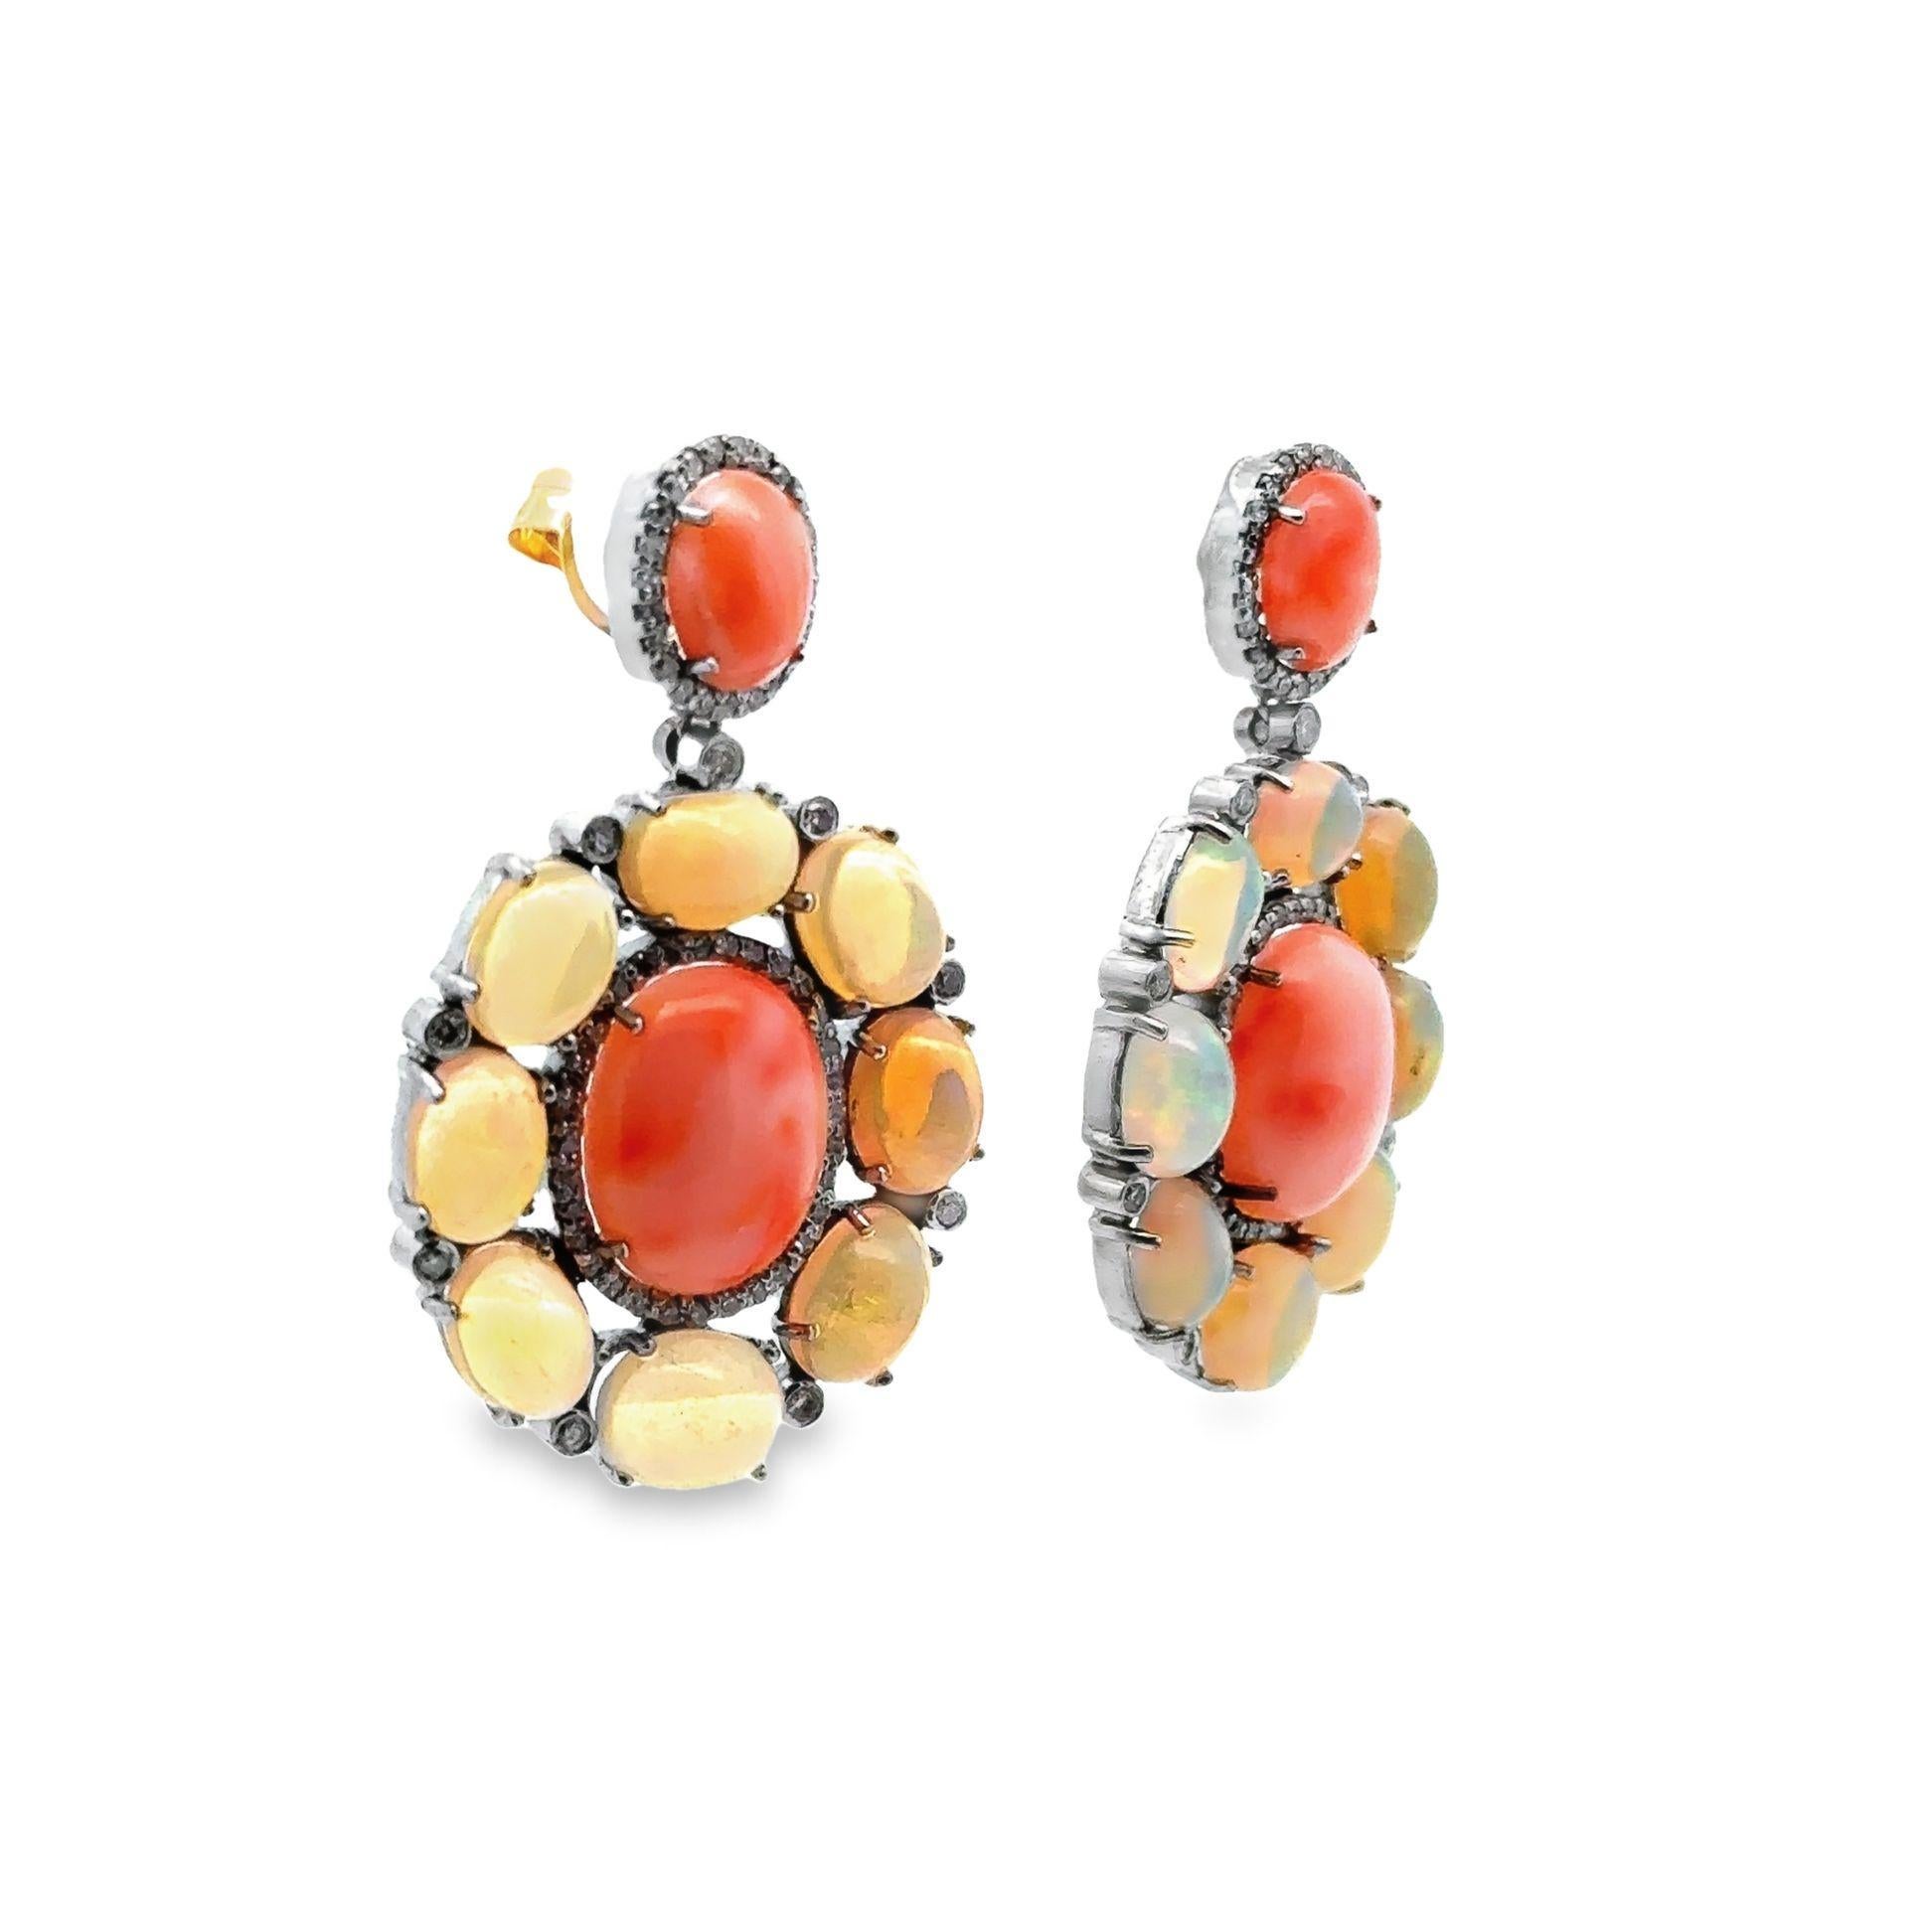 Indulge in the enchanting beauty of these dangle earrings, adorned with crystal opals, vibrant pinkish-orange coral, and sparkling diamonds! The mesmerizing play of colors in the halo of opals evoke a sense of mystique and allure. Paired with the